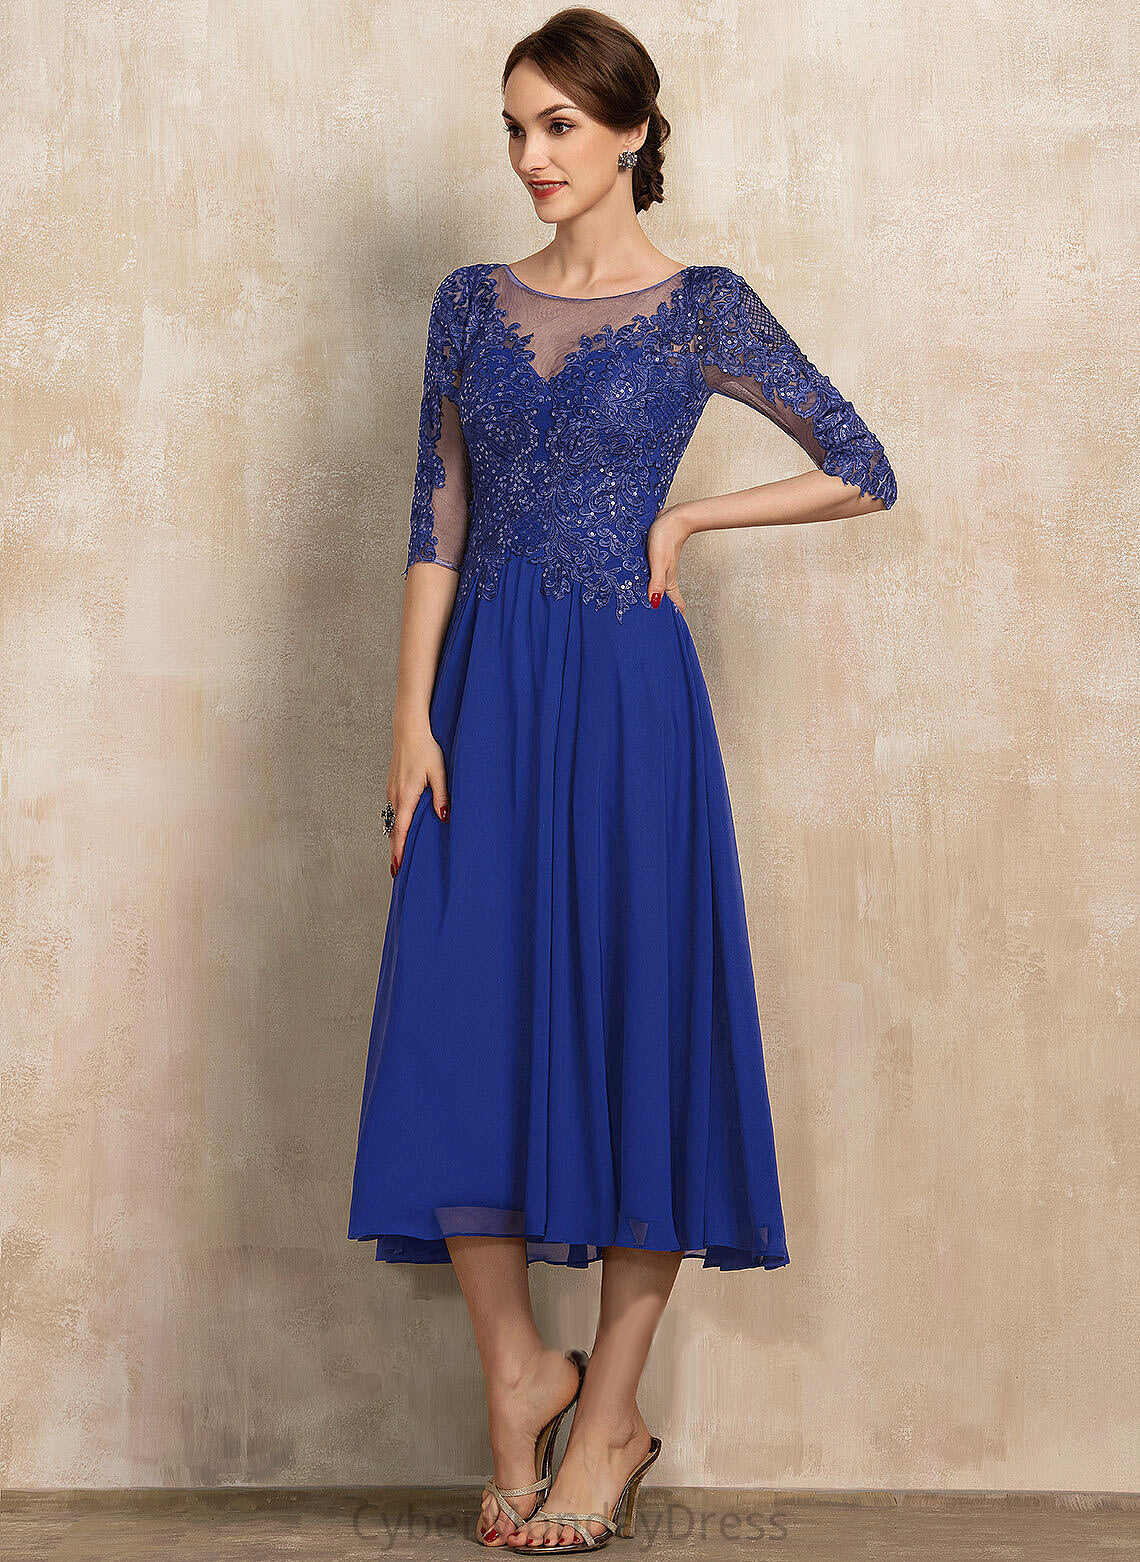 Lucy Dress Lace Sequins A-Line Neck Cocktail Scoop Tea-Length With Cocktail Dresses Chiffon